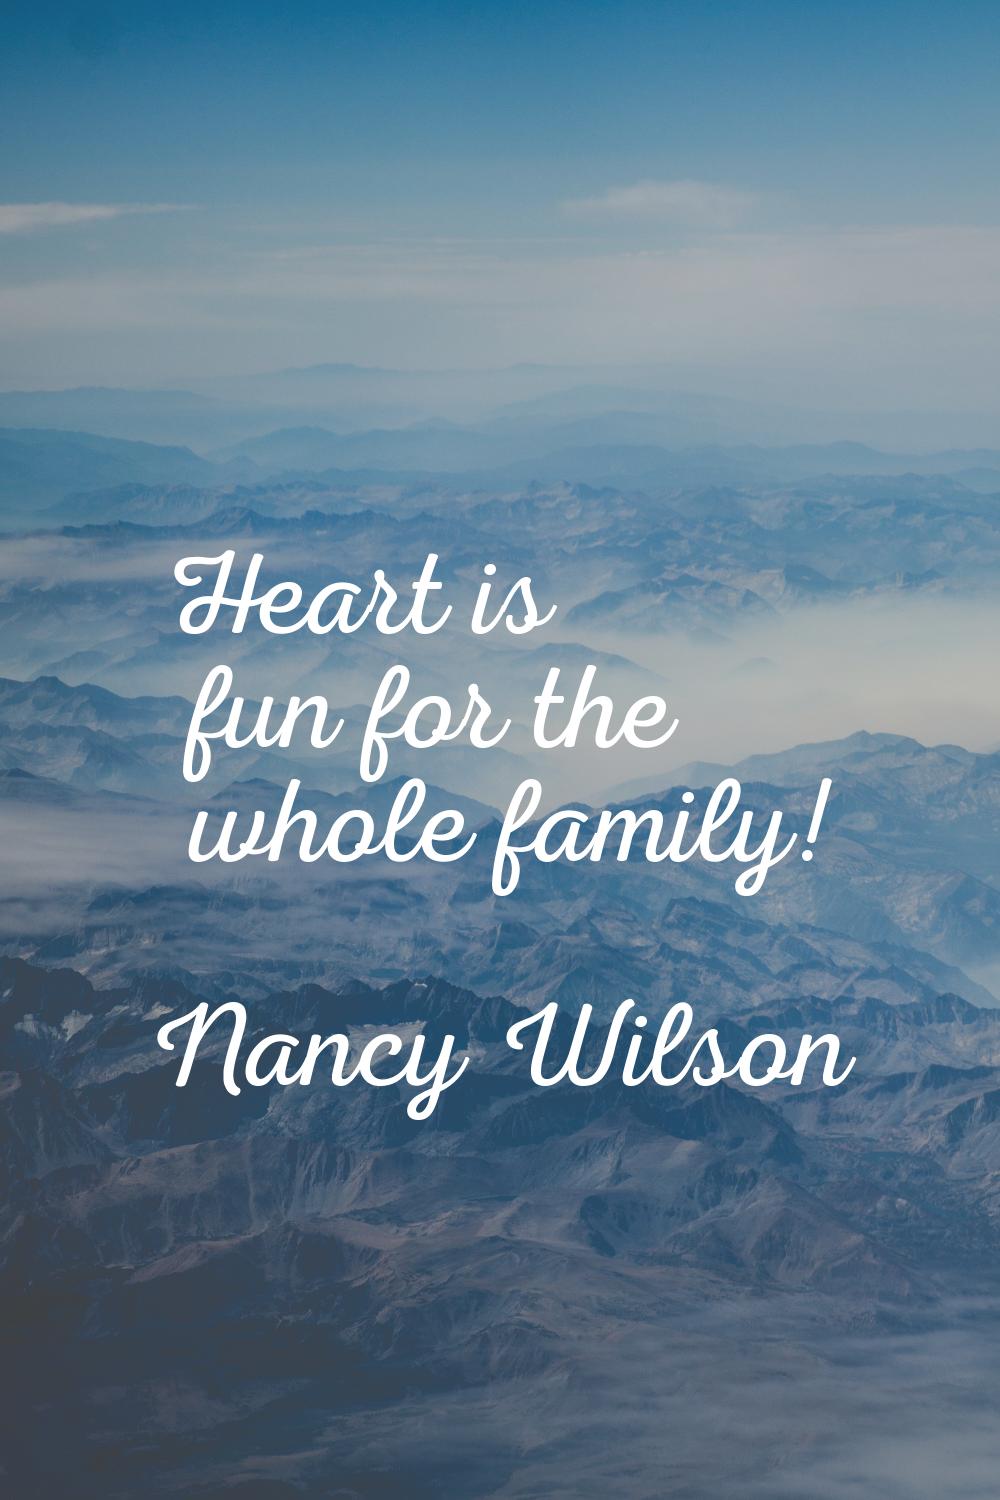 Heart is fun for the whole family!